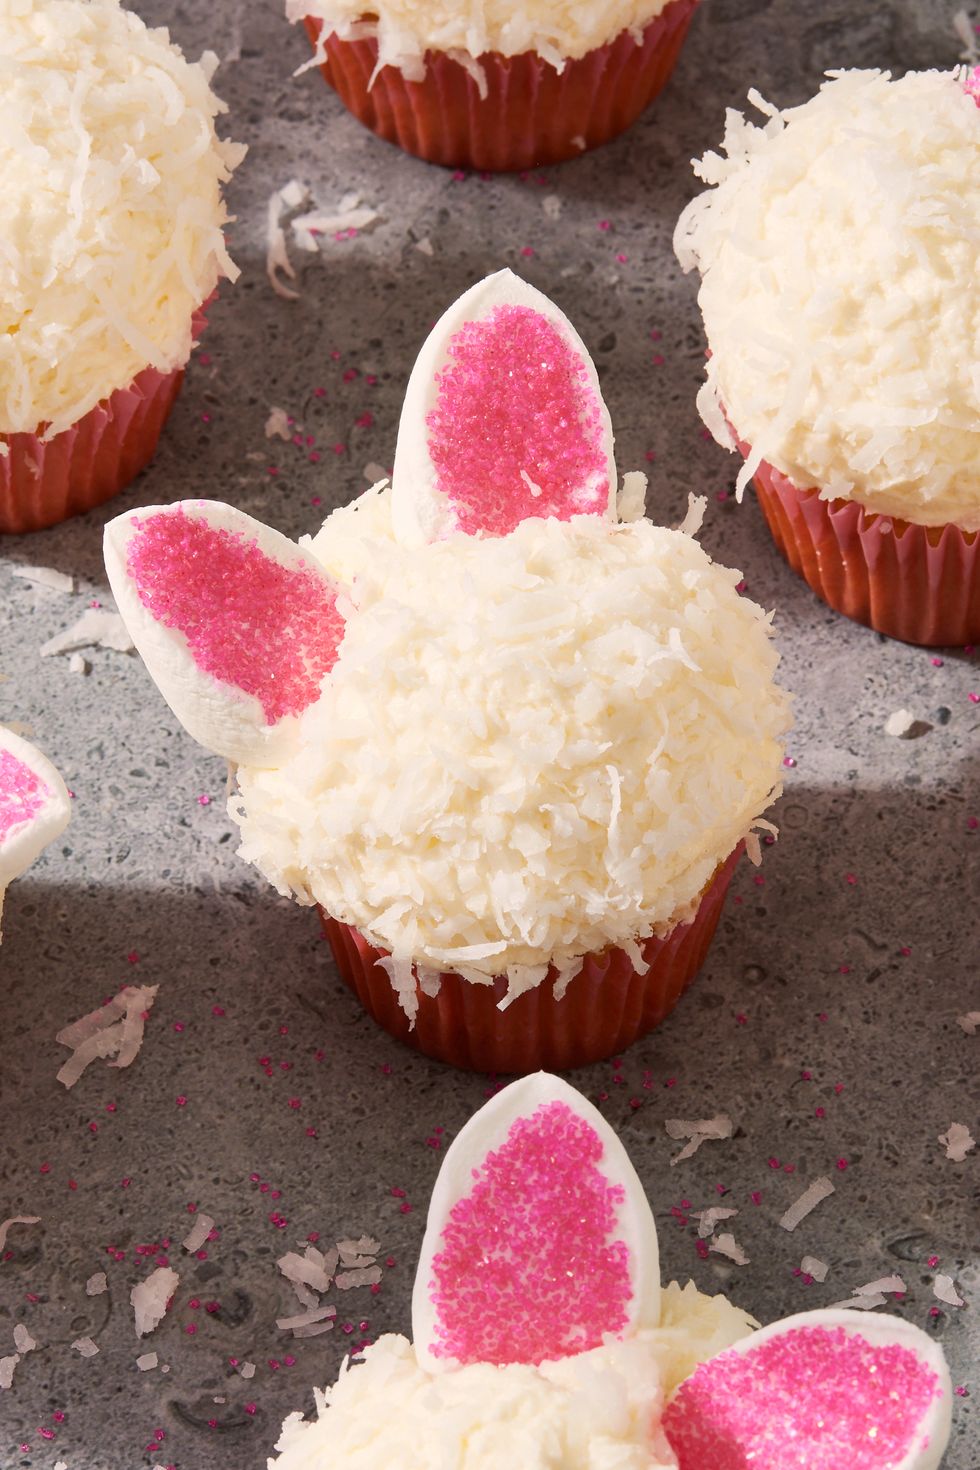 bunny cupcakes topped with white shredded coconut and marshmallow ears with pink sanding sugar